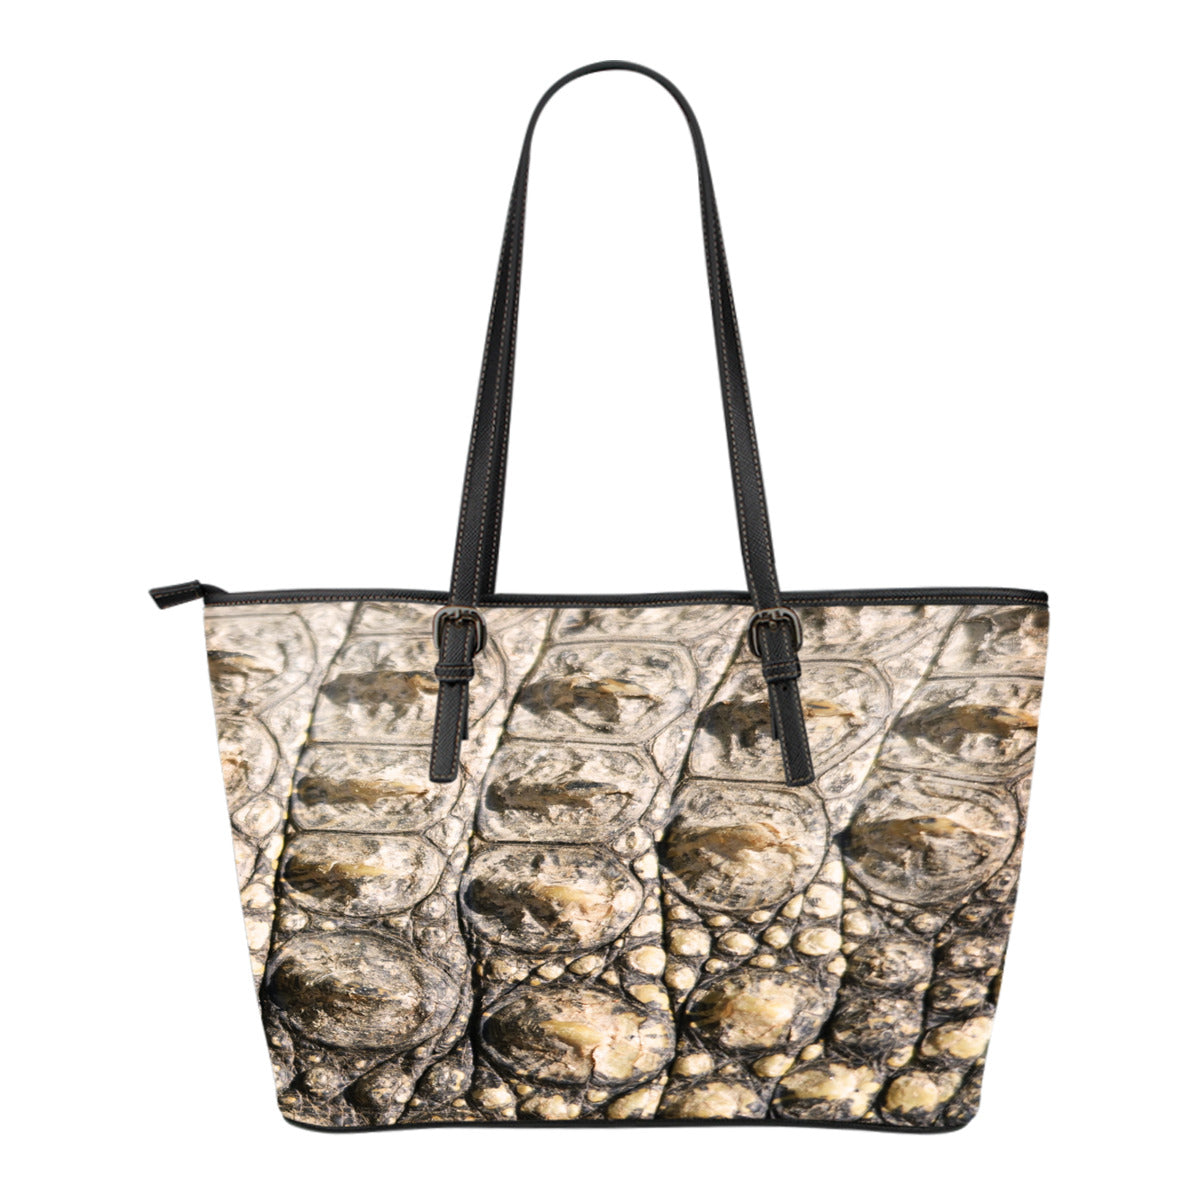 Animal Skin Texture Themed Design C2 Women Small Leather Tote Bag